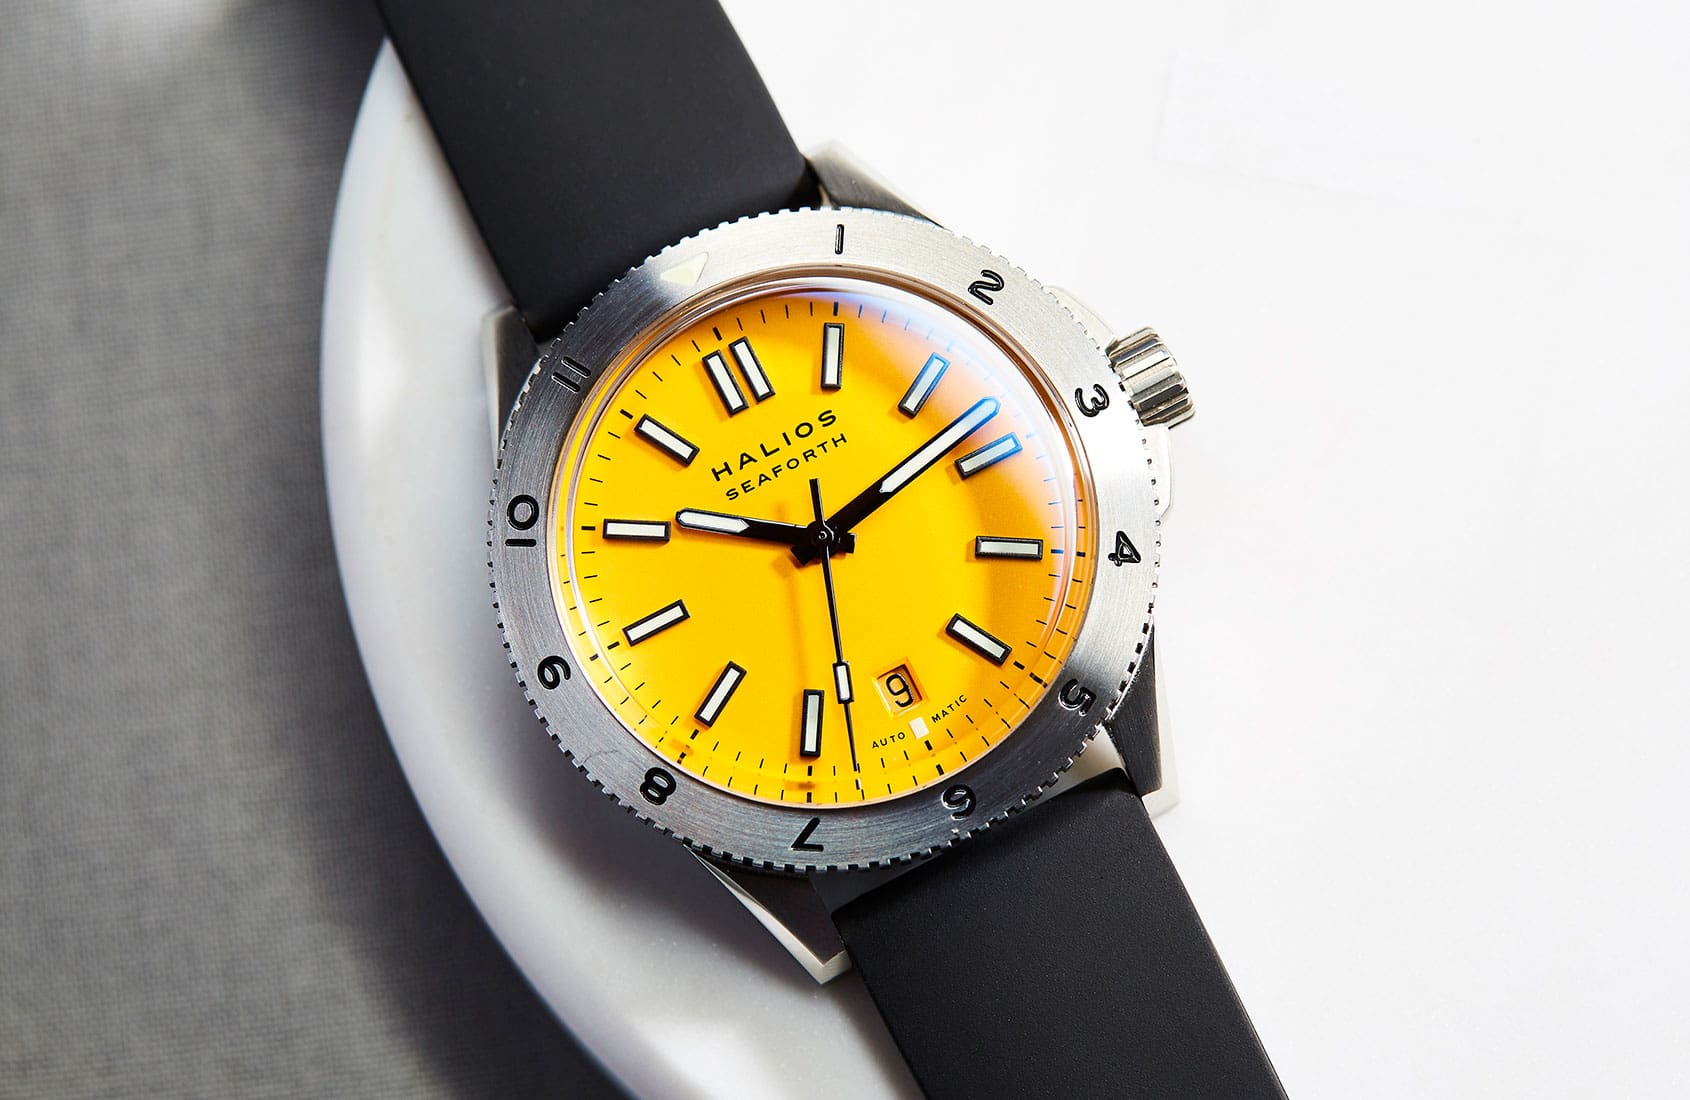 Halios Holotype Watch Review | aBlogtoWatch